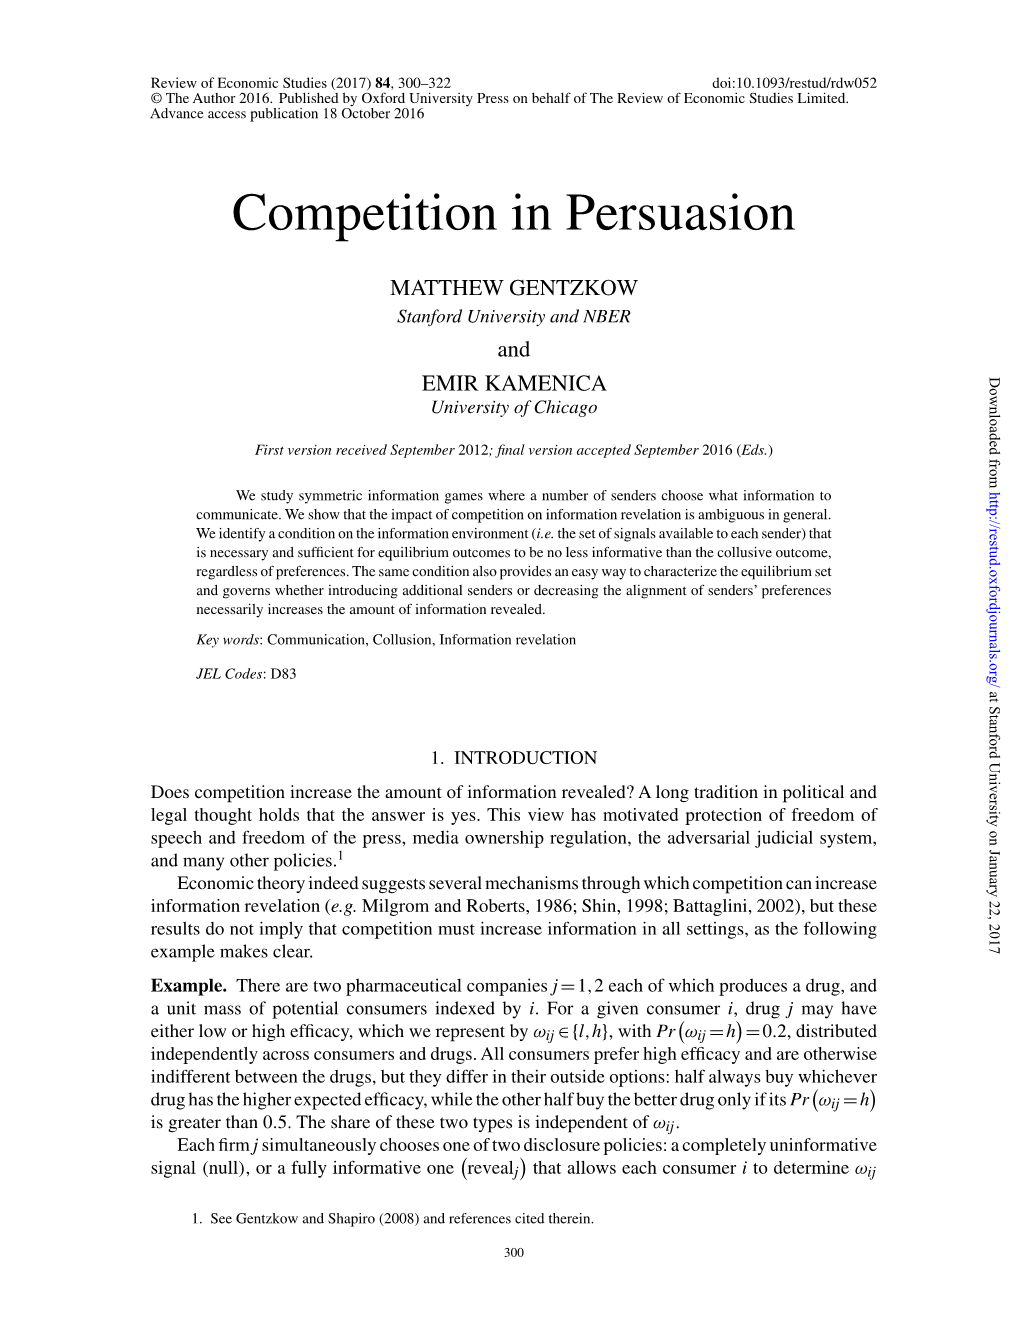 Competition in Persuasion